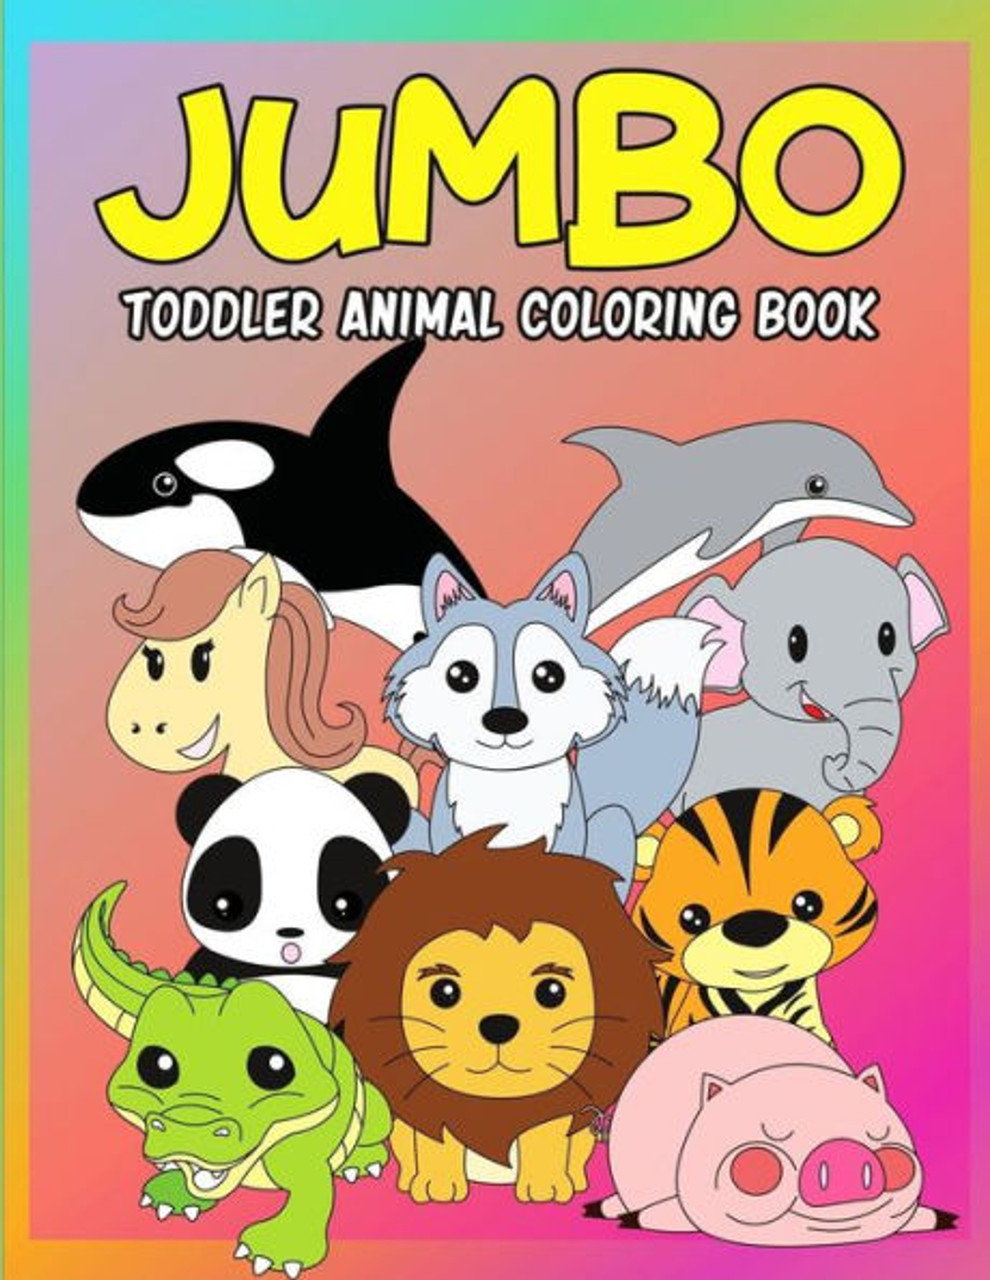 Jumbo Toddler Animal Coloring Book: My First Big Book of Coloring, Early  Learning and Preschool Prep for Kids And Toddlers Children Activity Books  for  Print Coloring Pages (Giant Coloring Books) 